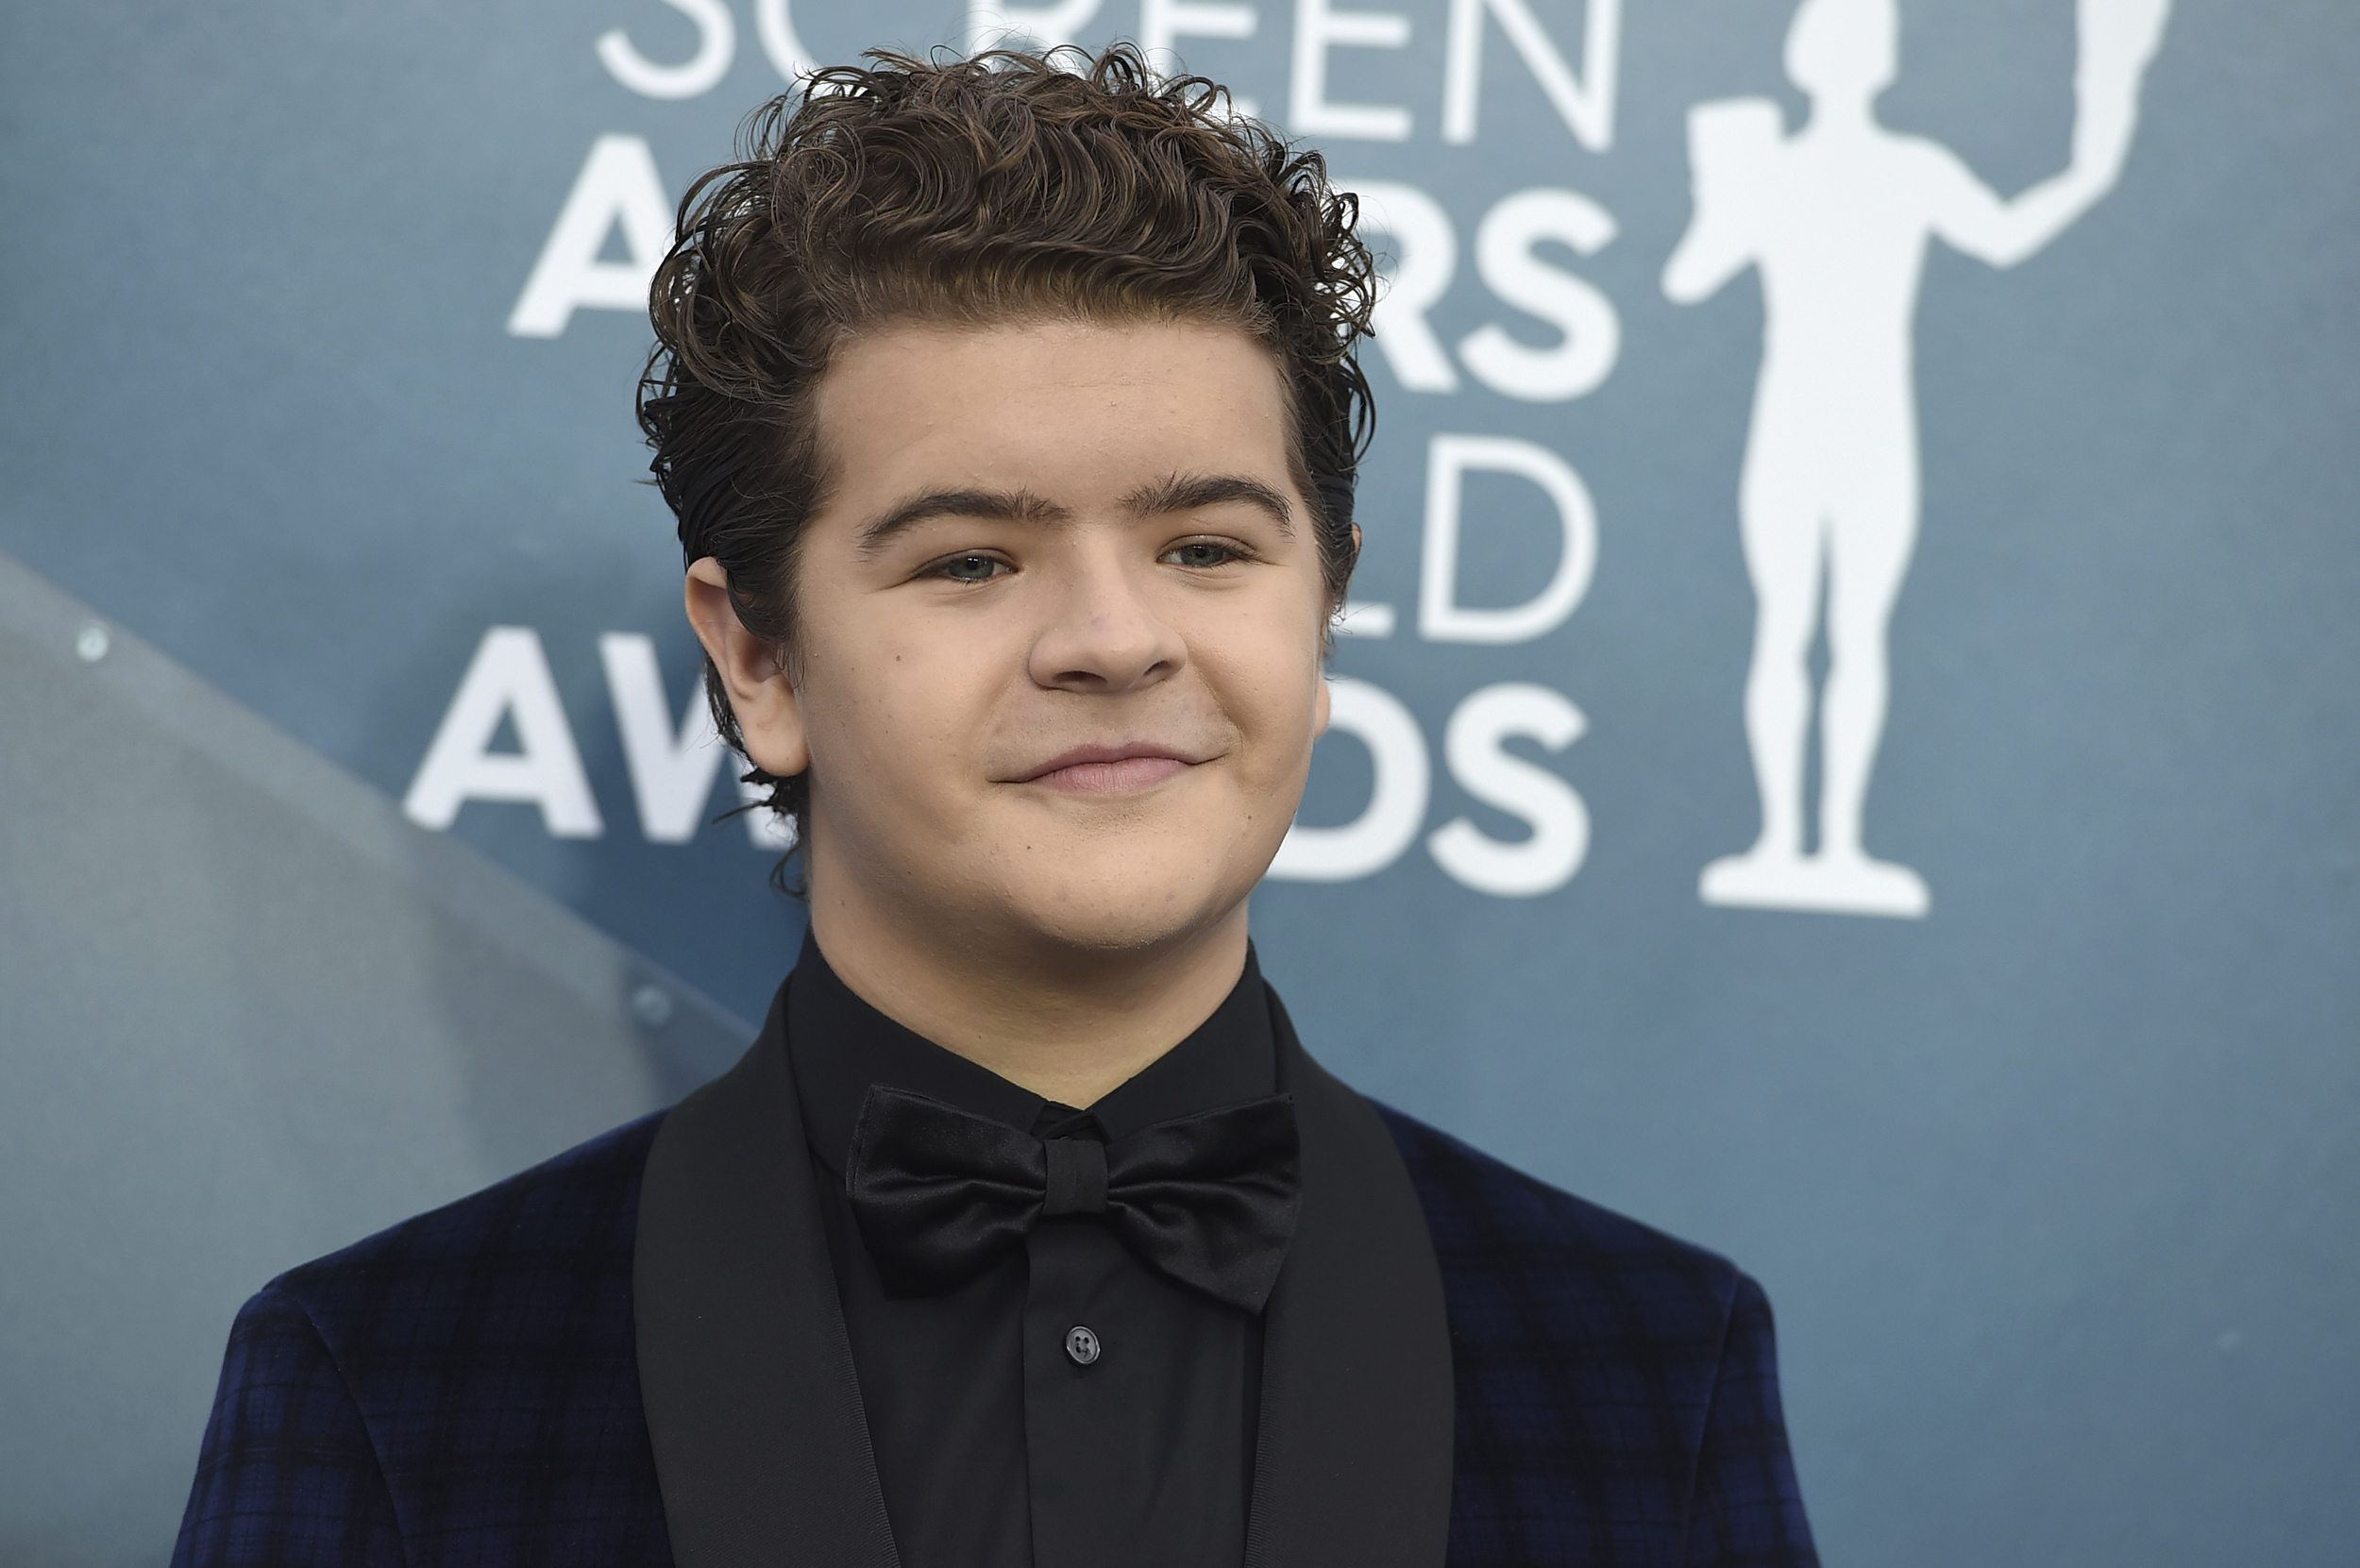 Actor Gaten Matarazzo: Films, tv shows, new webstories and other details